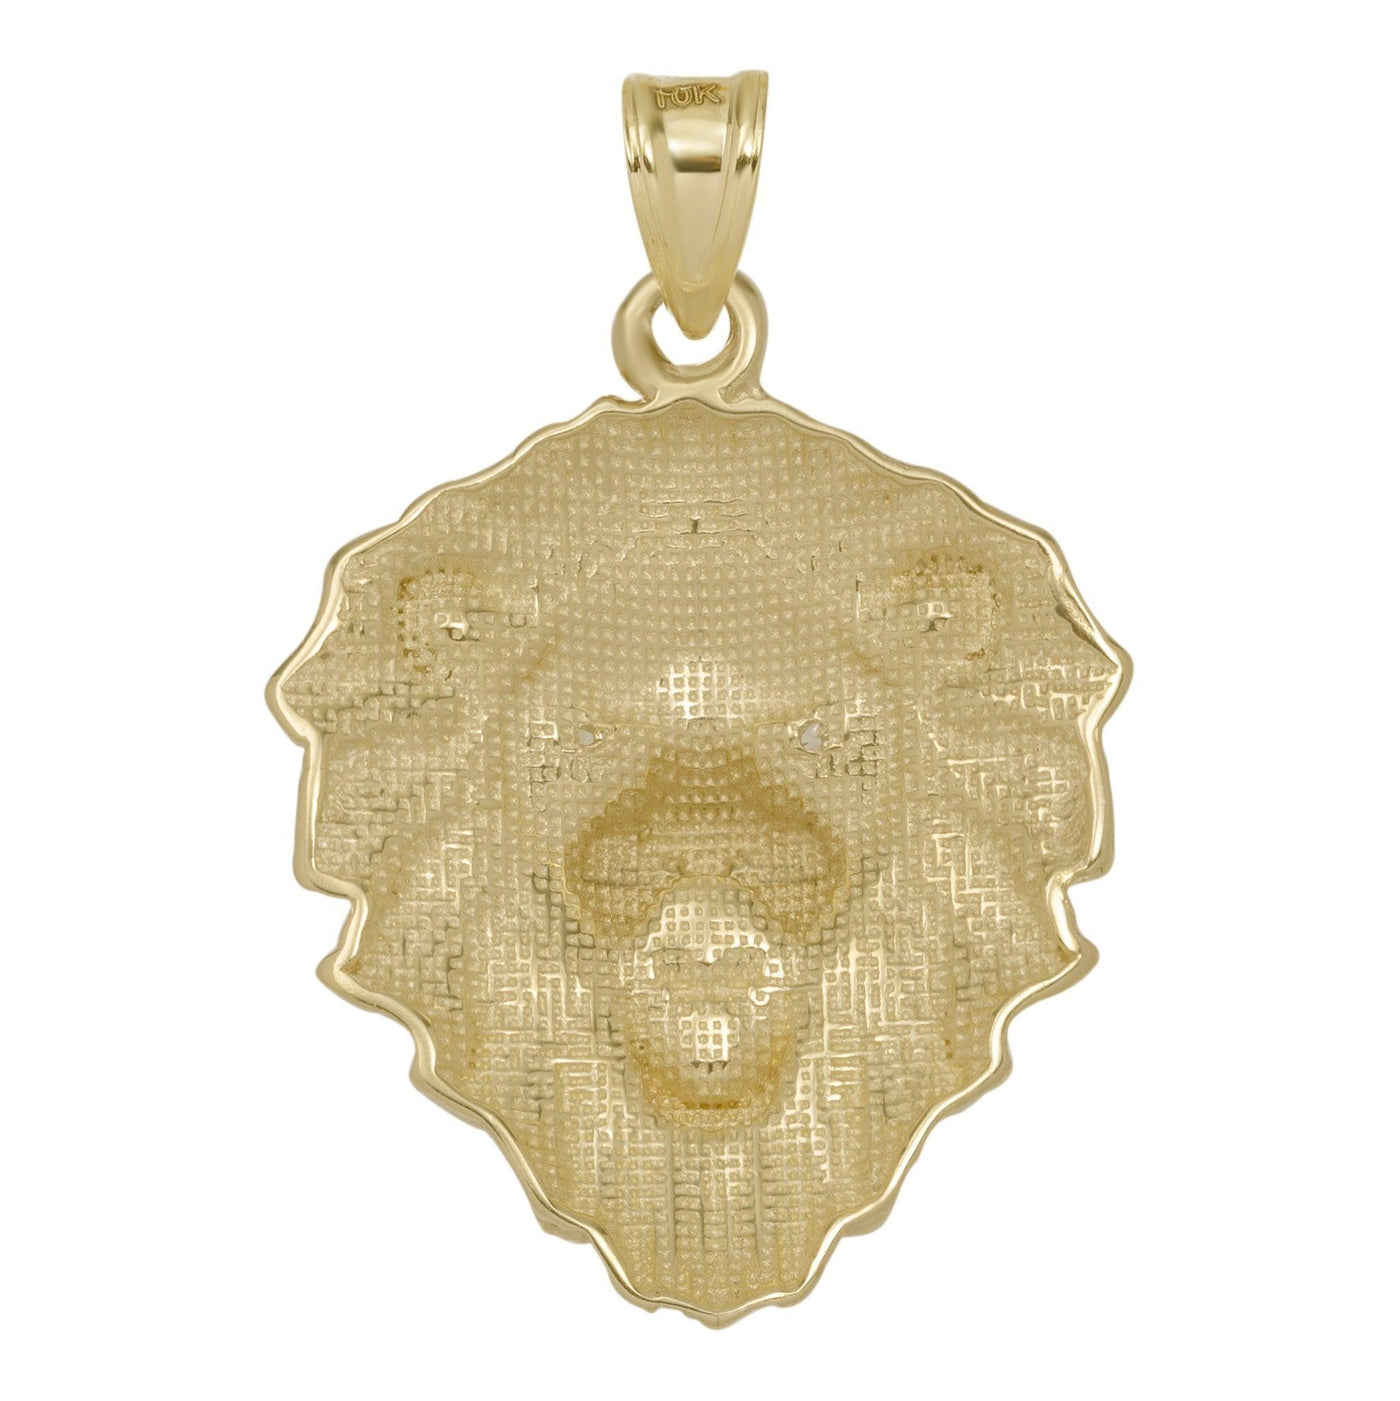 Textured Roaring Lion with CZ Eyes Pendant Solid 10K Yellow Gold - bayamjewelry